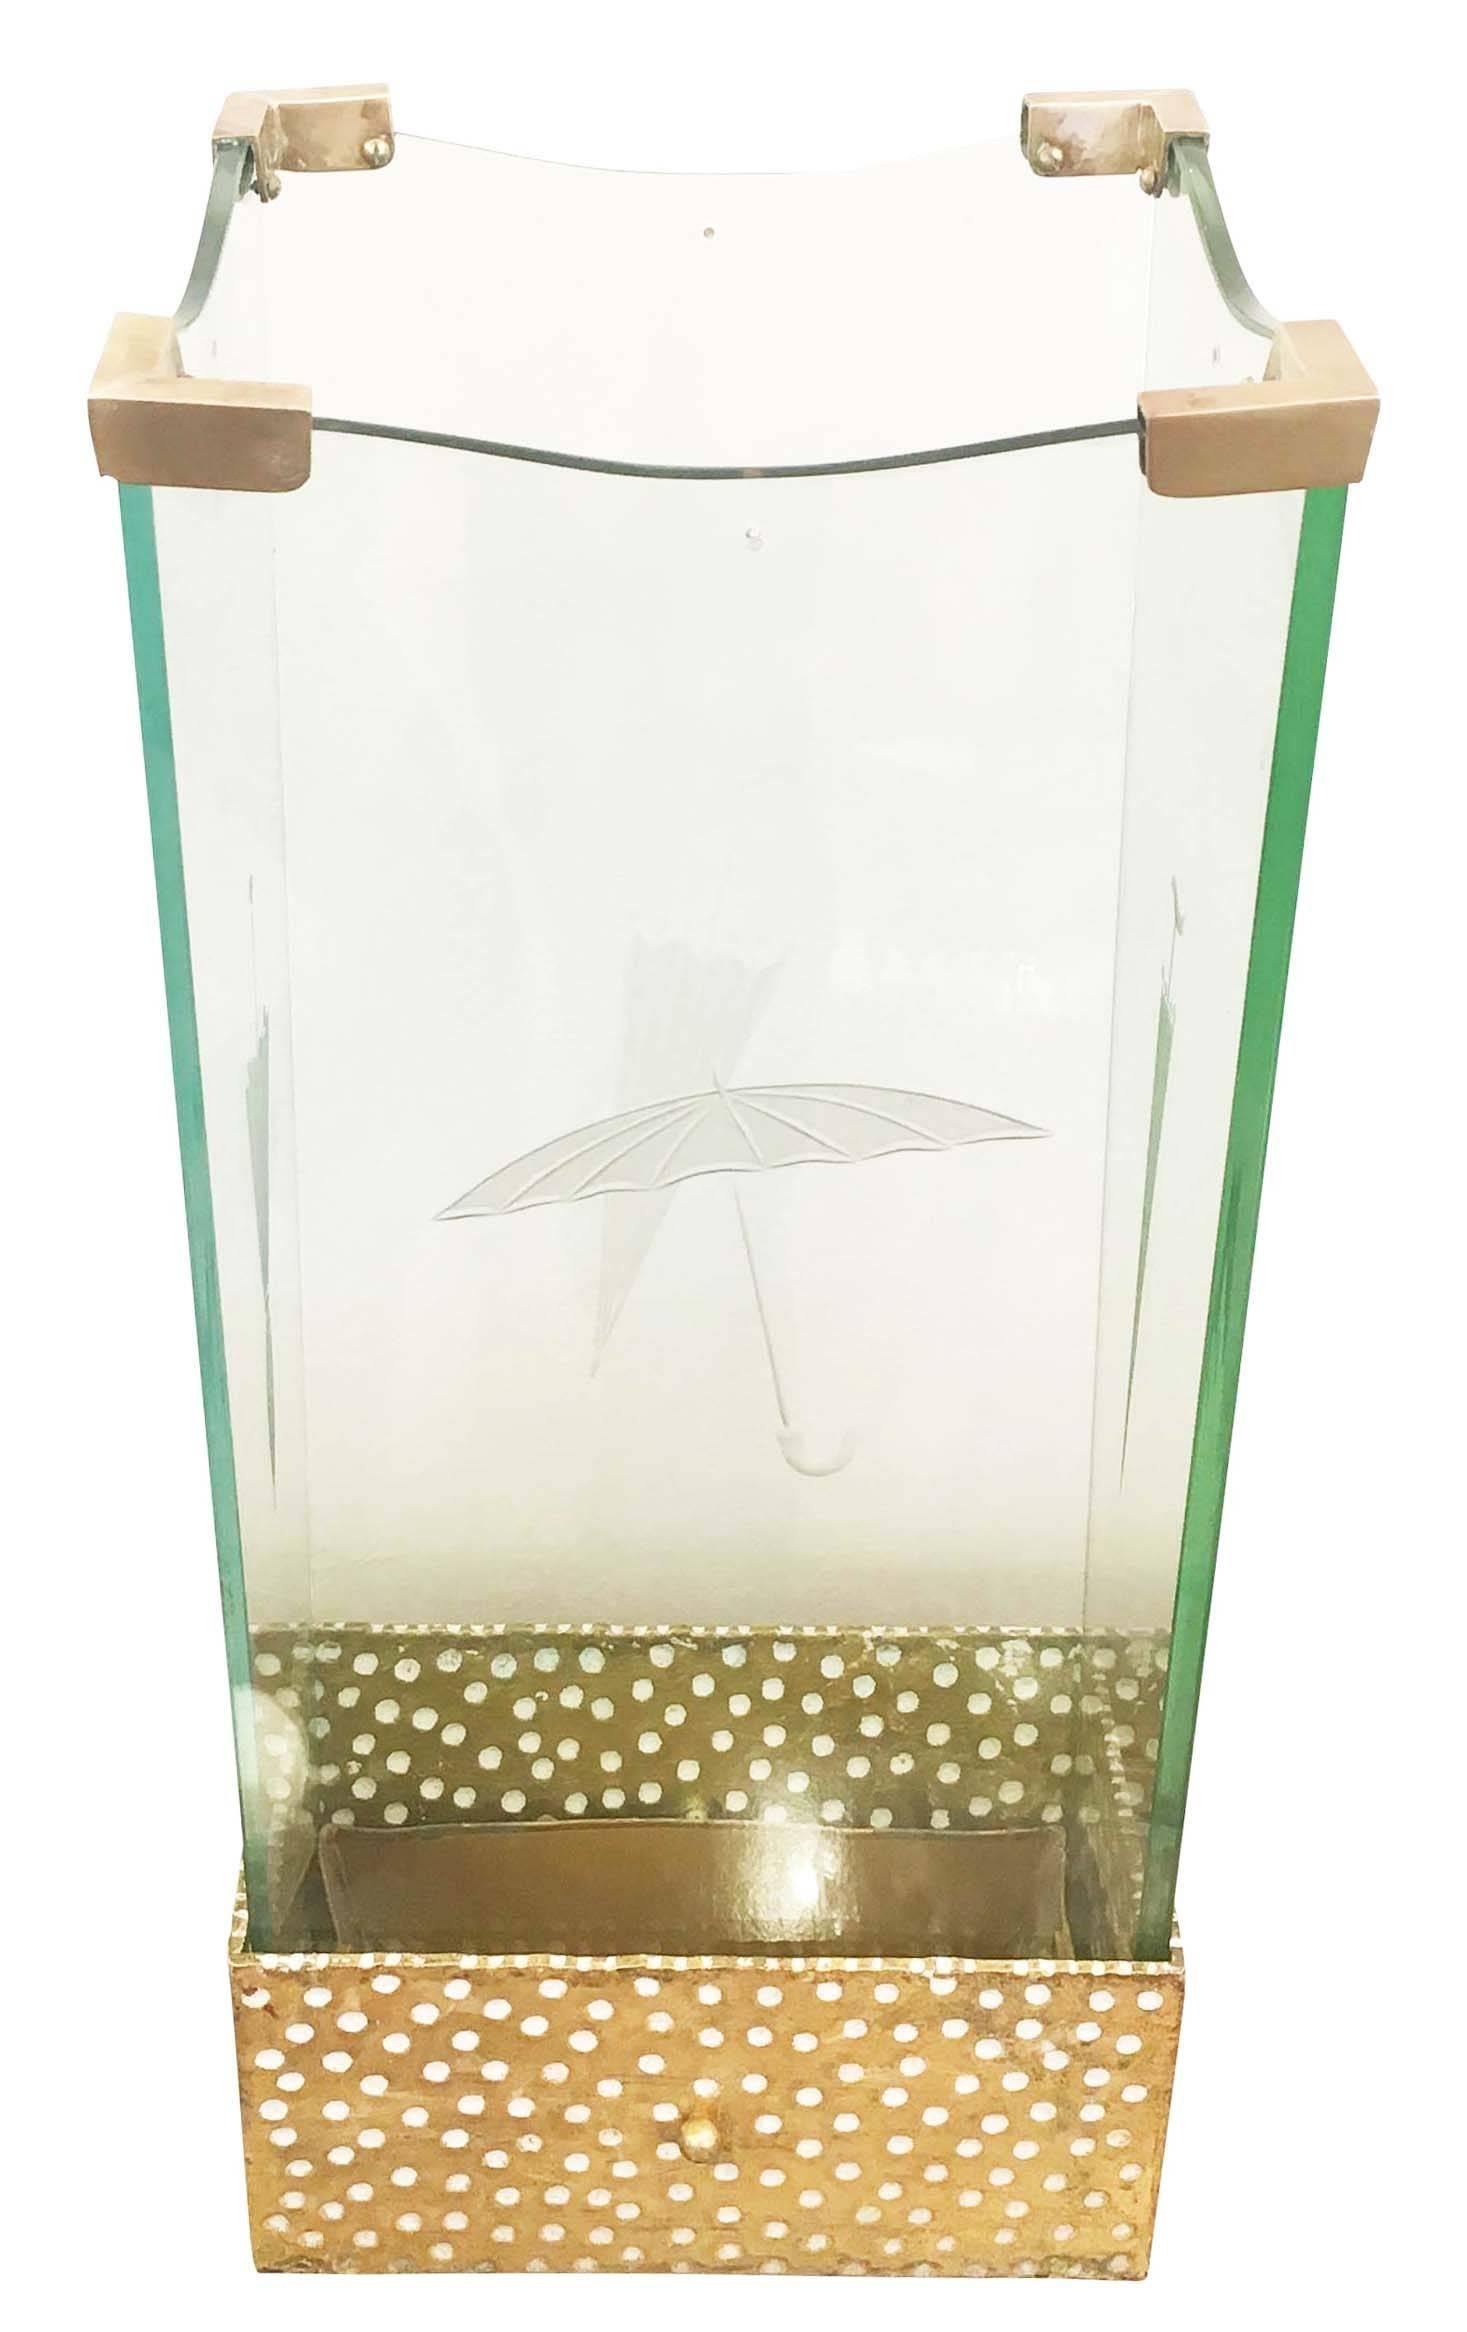 Playful glass and brass umbrella stand by crystal Art. Each of the four glass pieces has an etched image of an umbrella. The base is lacquered gold with white dots while the hinges at the corners are brass.